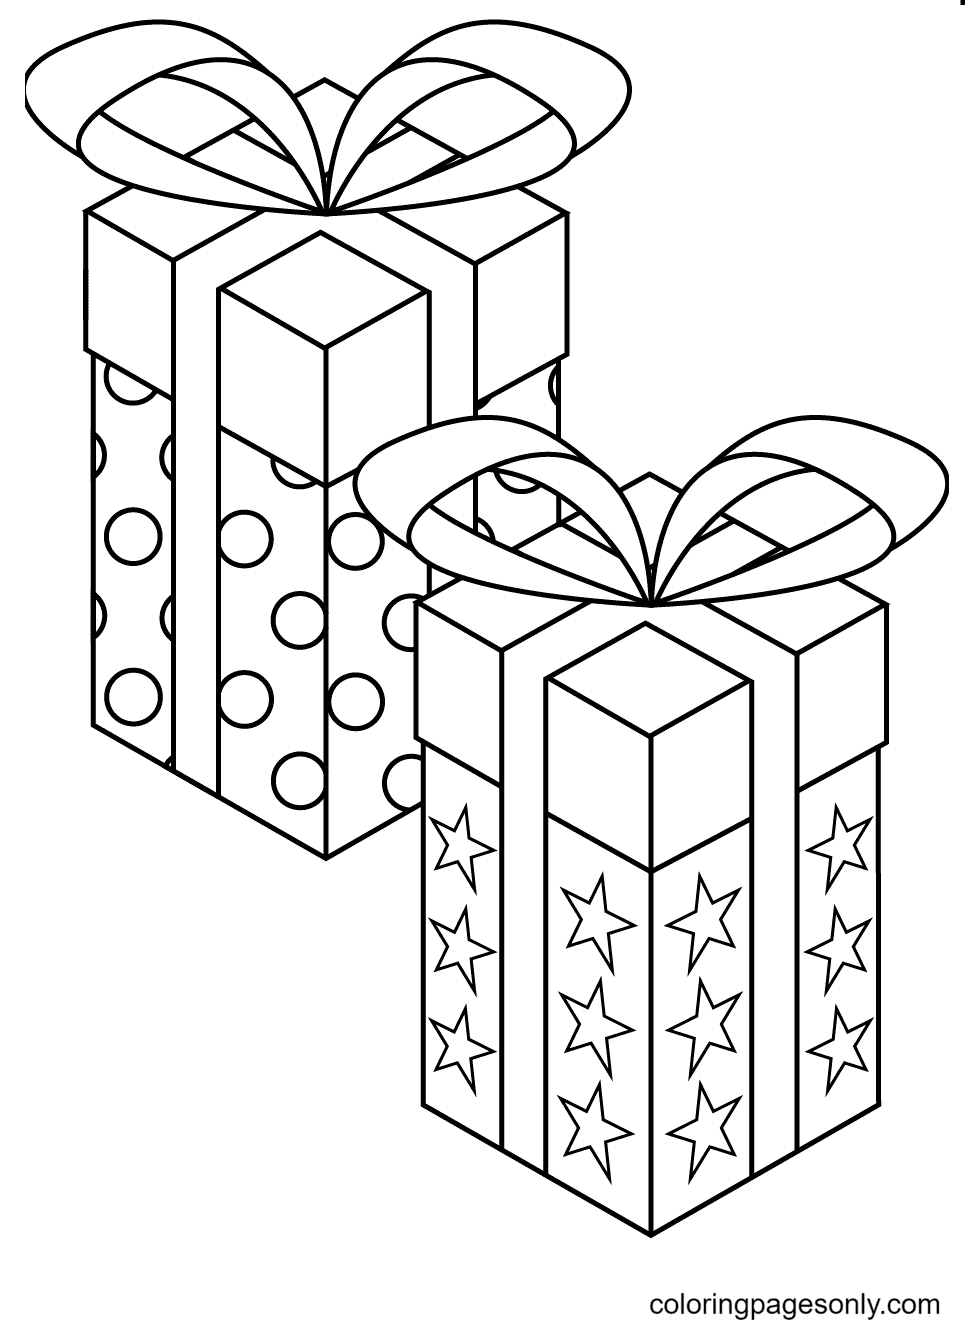 Pretty Pair of Christmas Presents Coloring Page